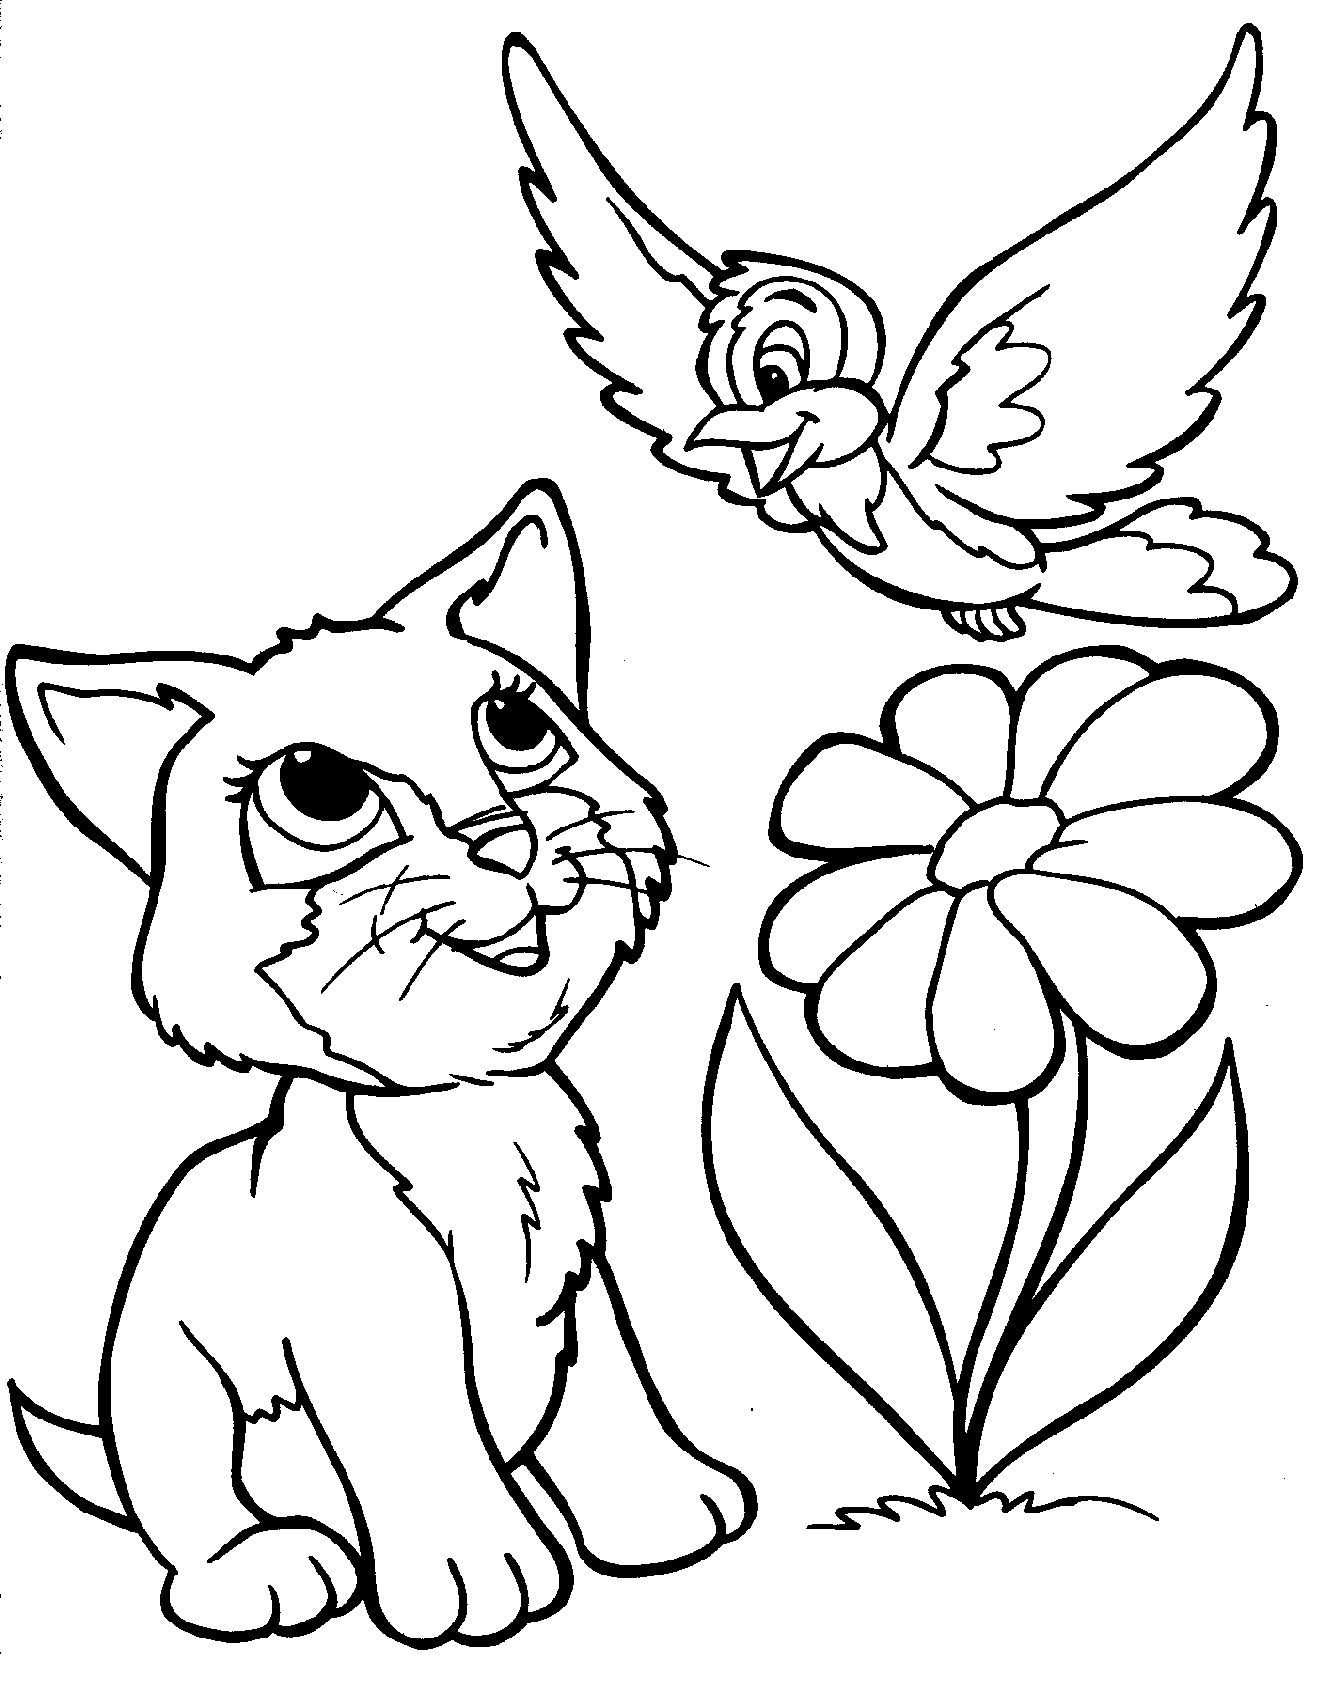 Kitten Printable Coloring Pages
 Free Printable Cat Coloring Pages For Kids